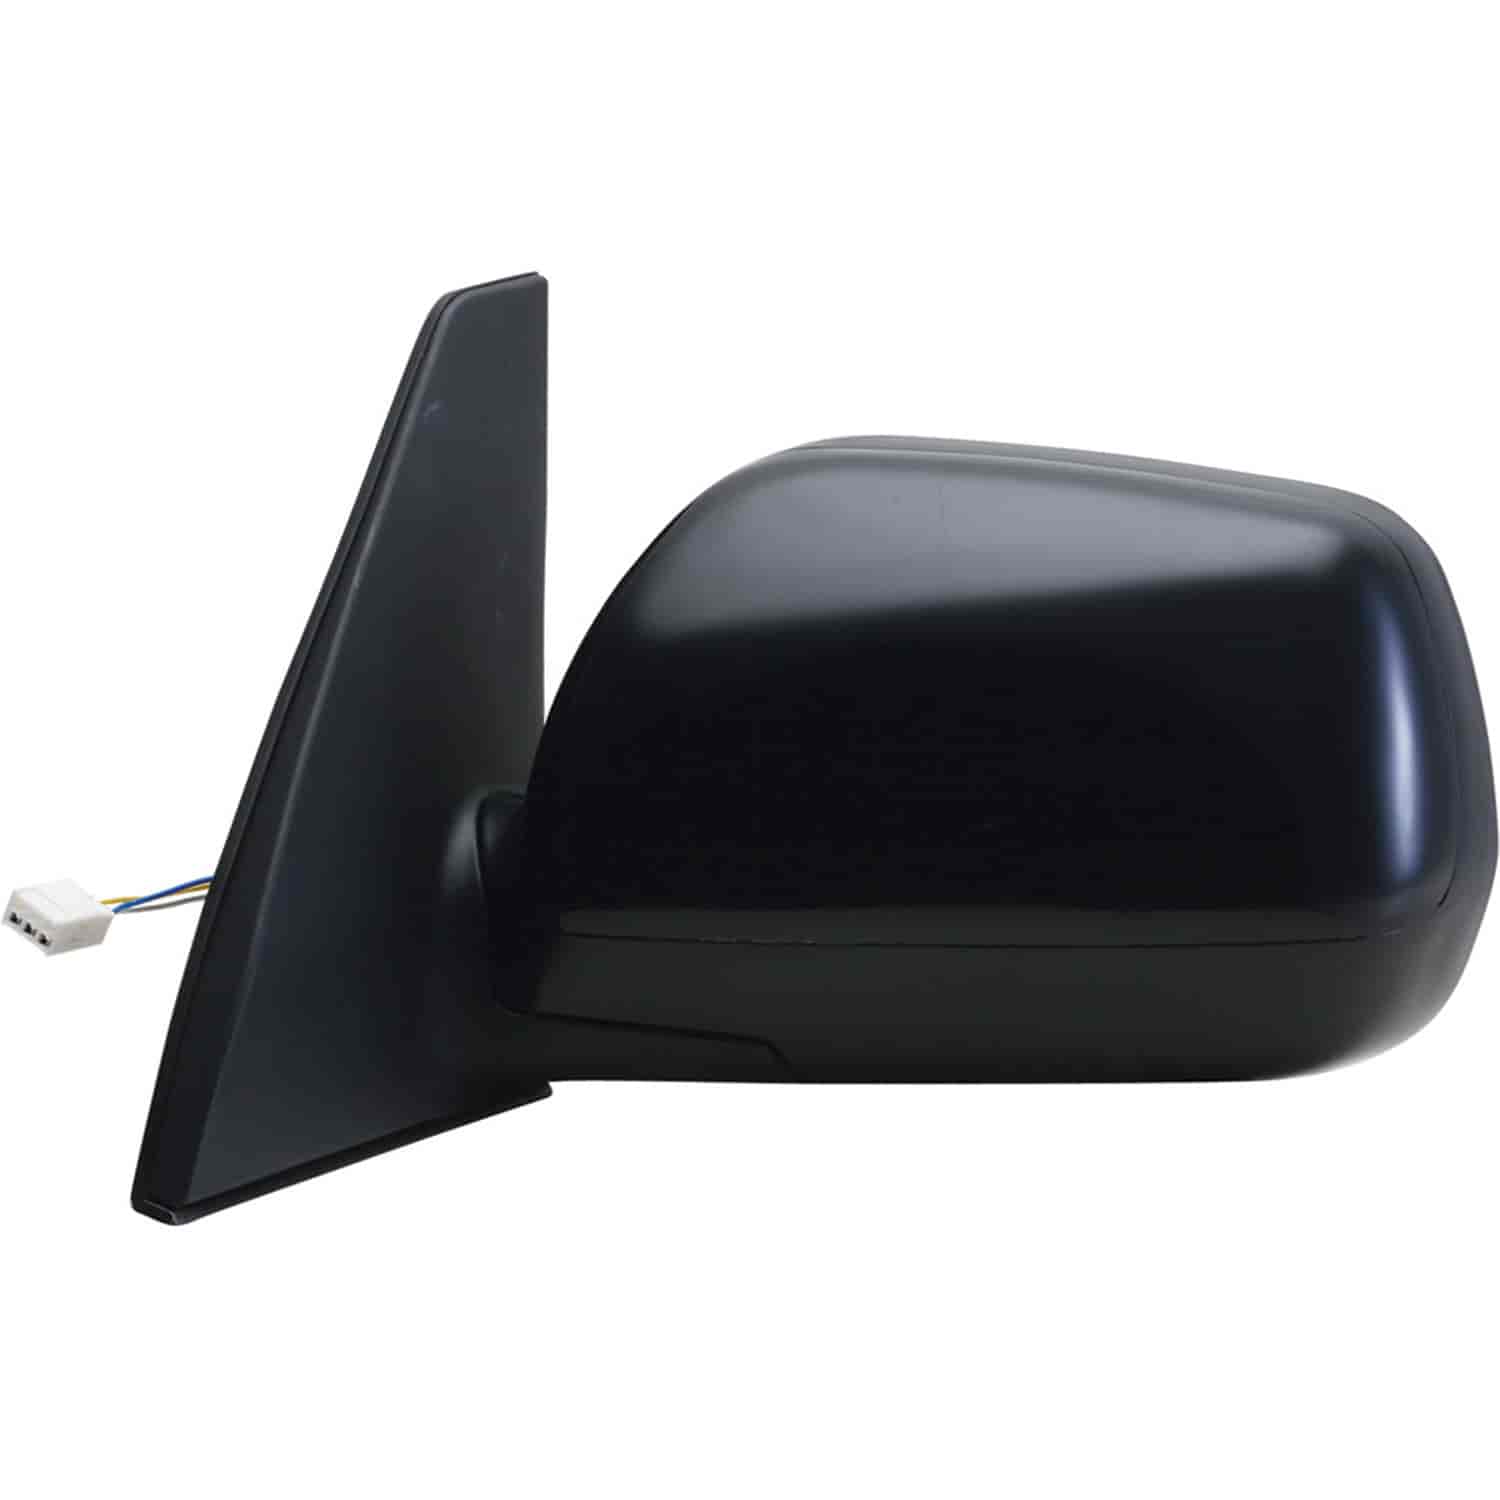 OEM Style Replacement mirror for 01-05 Toyota RAV4 driver side mirror tested to fit and function lik